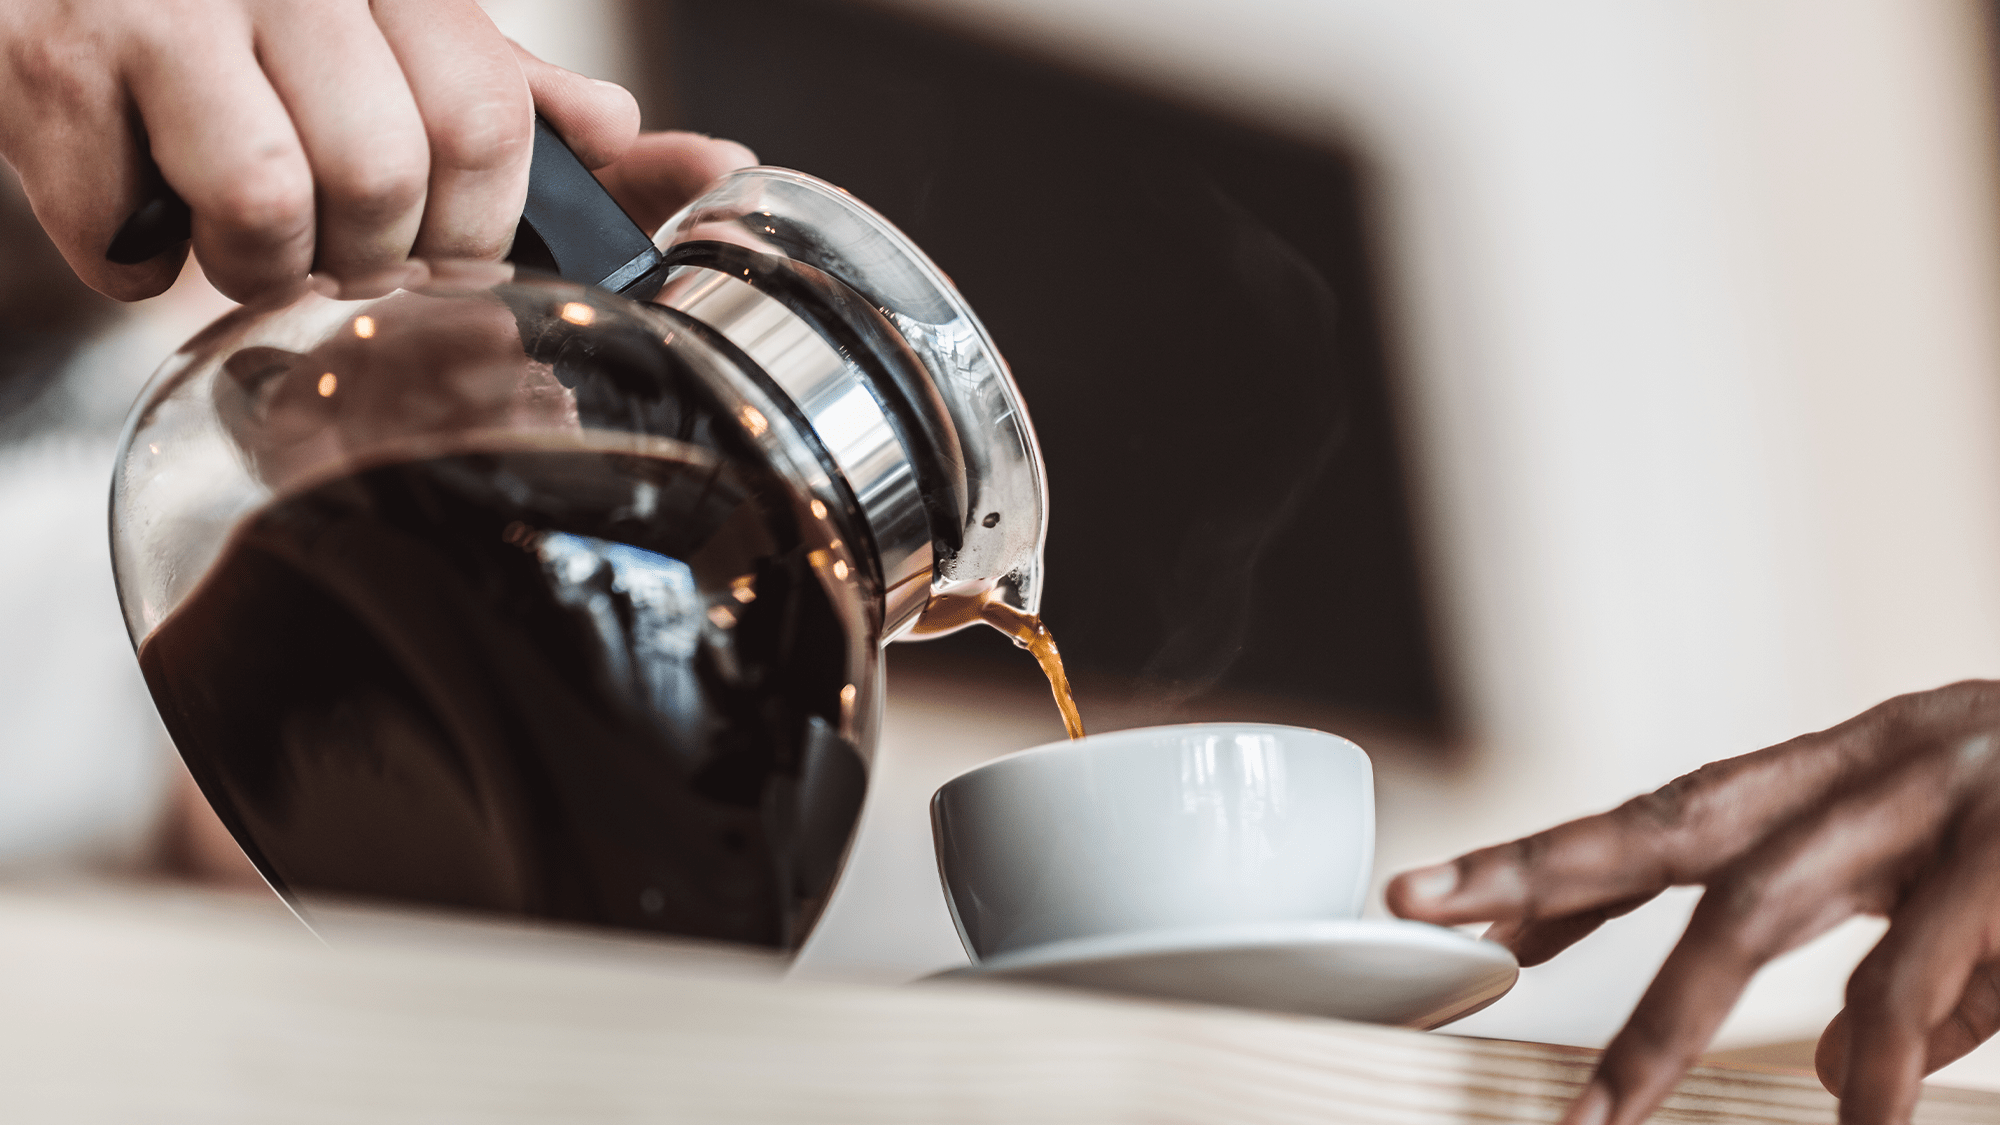 The ‘experience’ of a cup of coffee may be just as stimulating as its caffeine